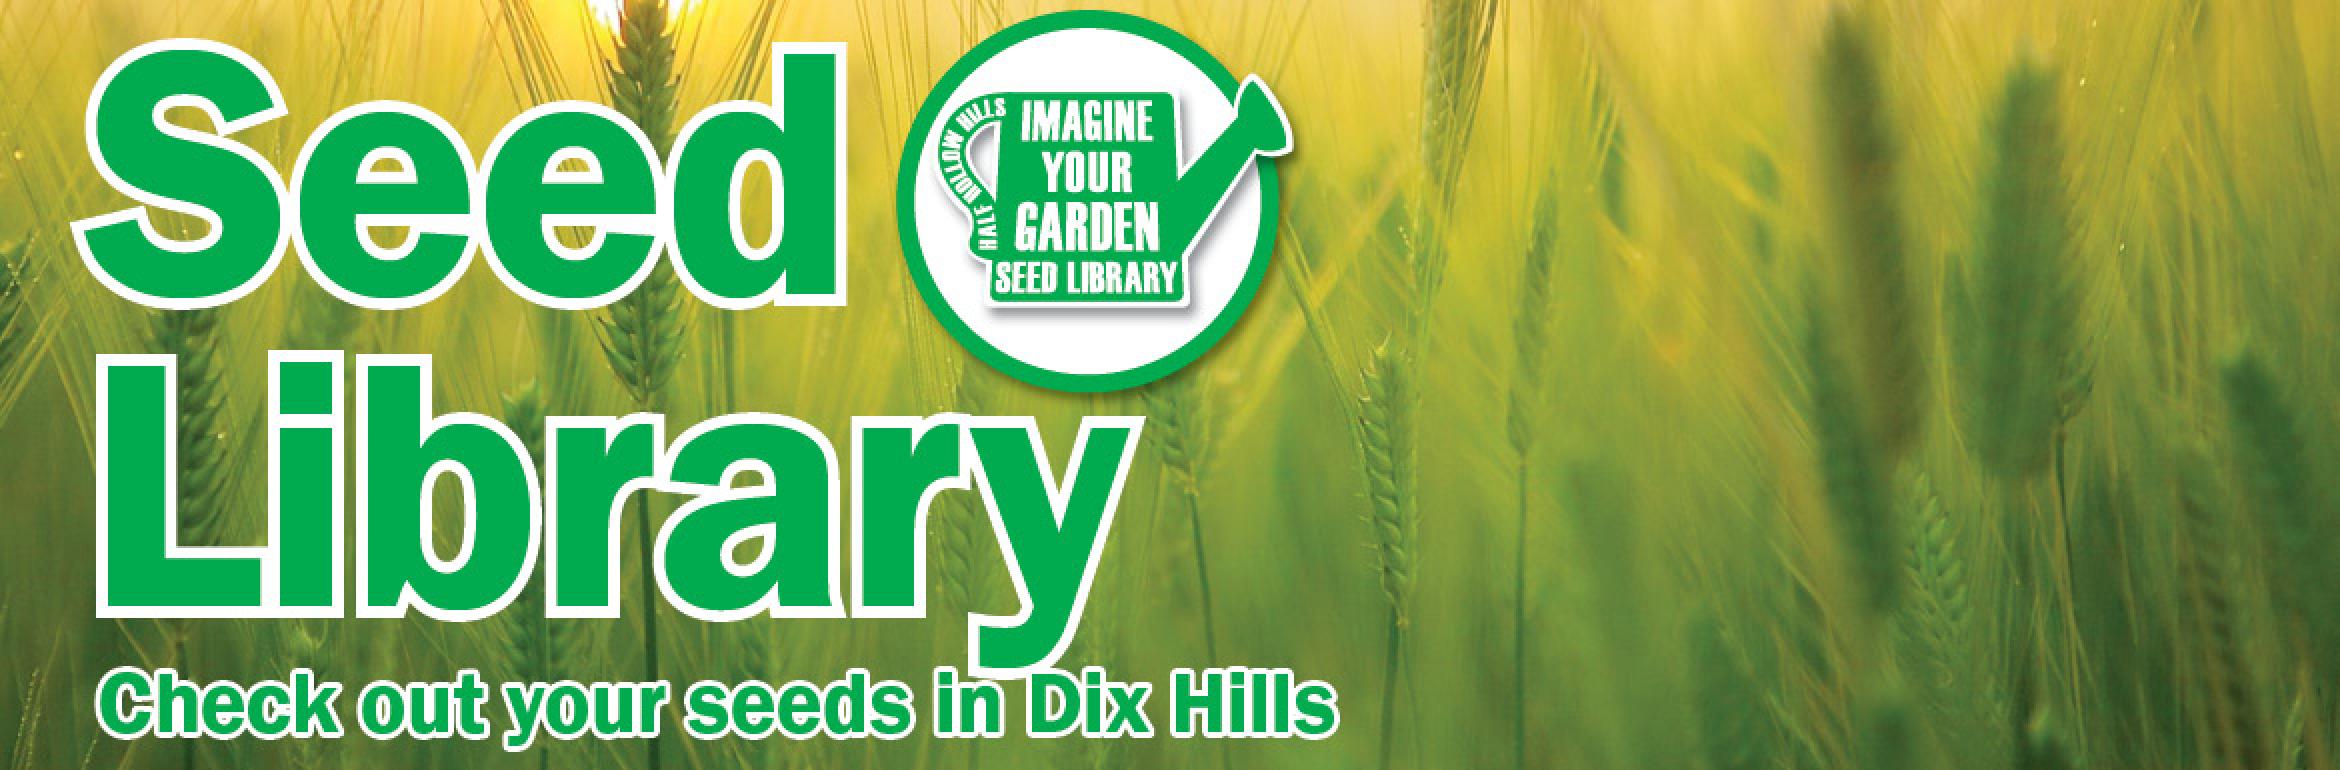 Seed Library. Half Hollow Hills - Imagine Your Garden - Seed Library. Check out your seeds in Dix Hills.